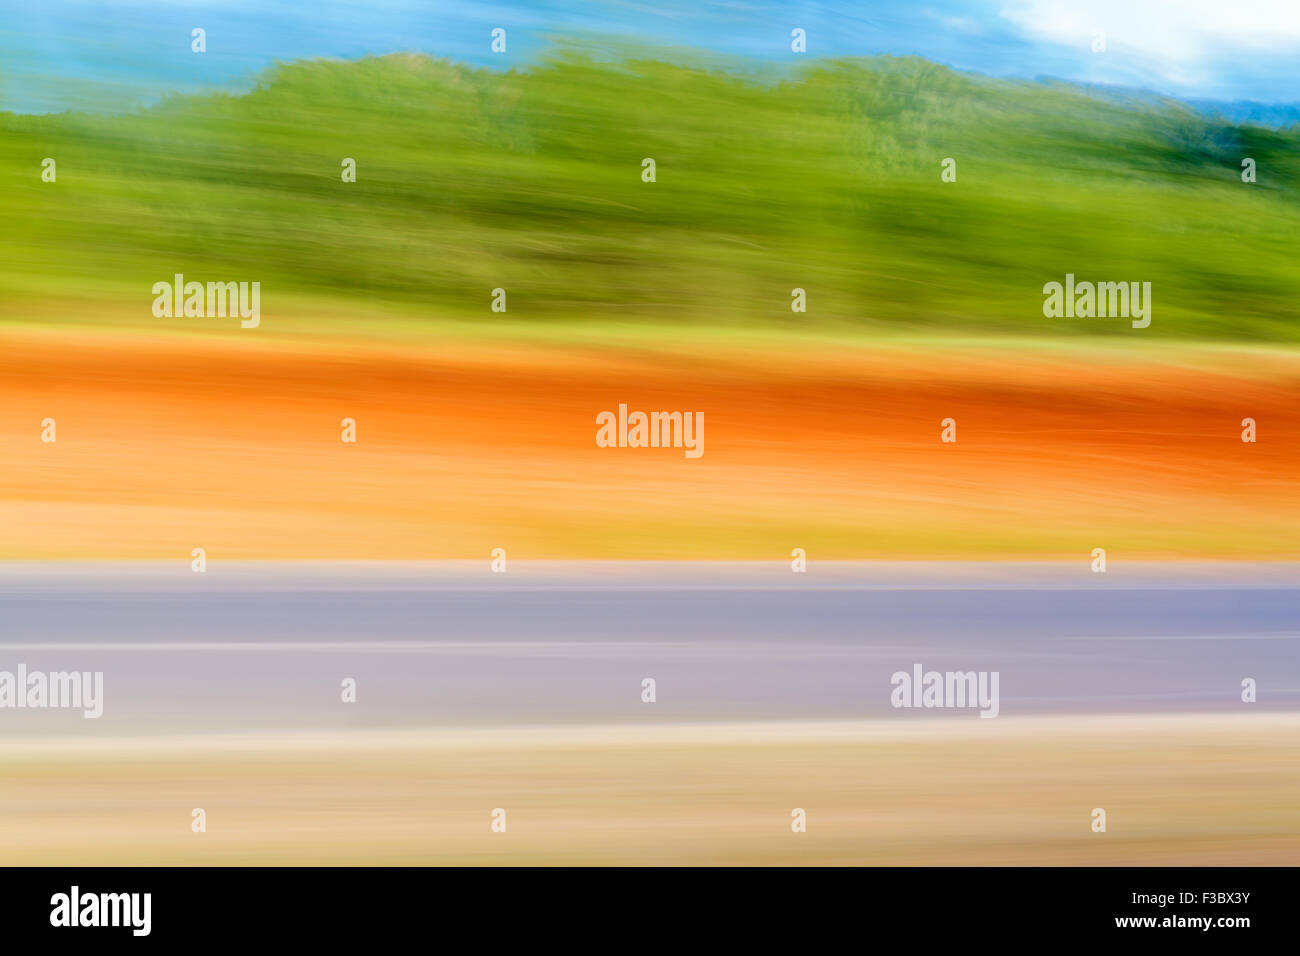 Colorful blured motion background blur blurry abstract Stock Photo